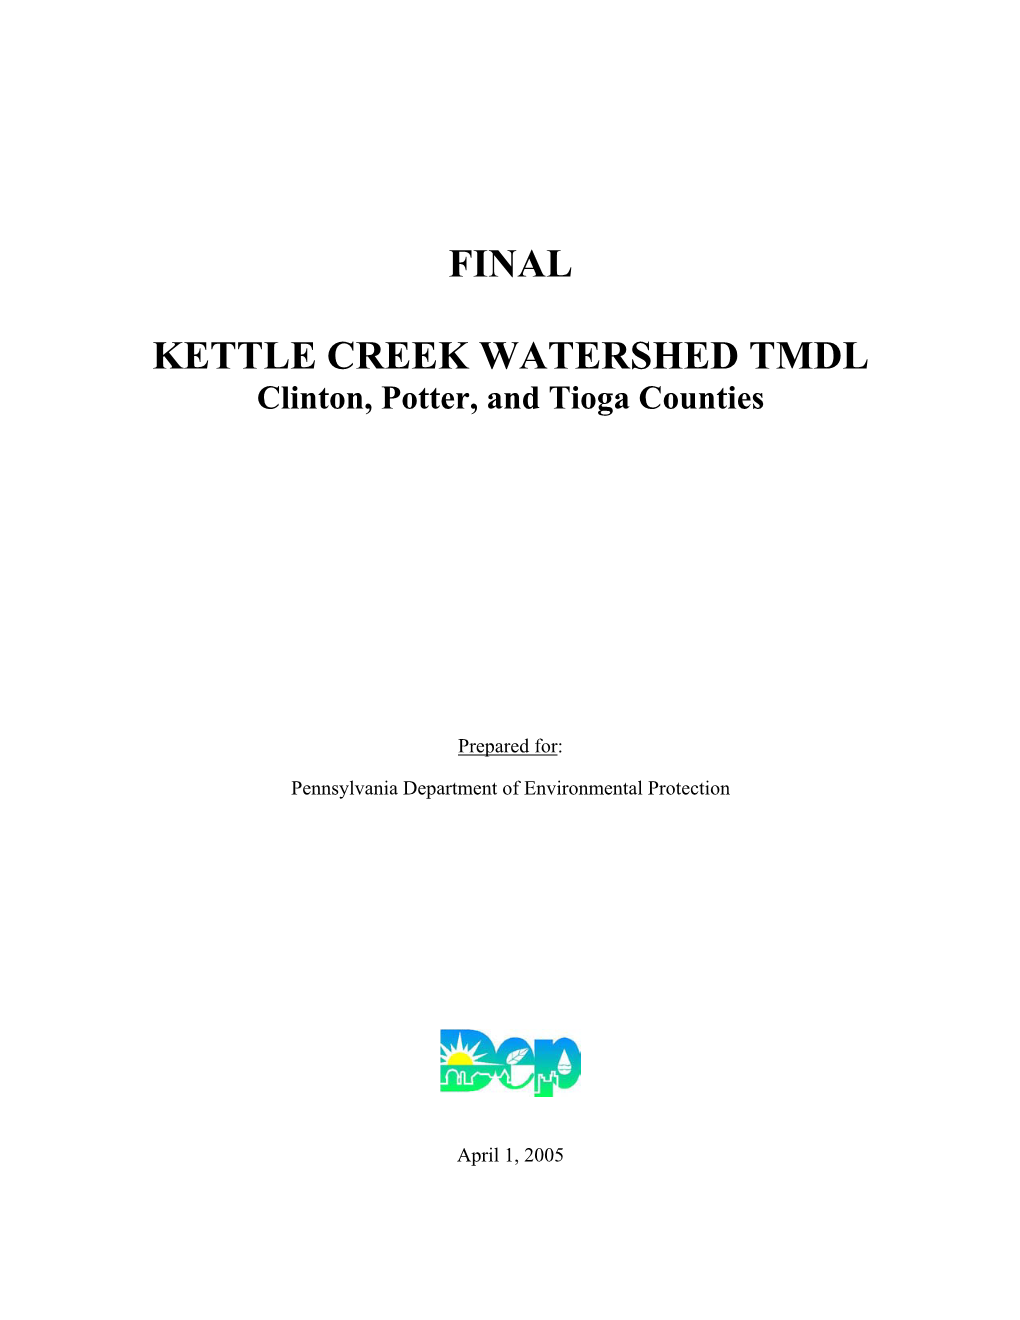 KETTLE CREEK WATERSHED TMDL Clinton, Potter, and Tioga Counties